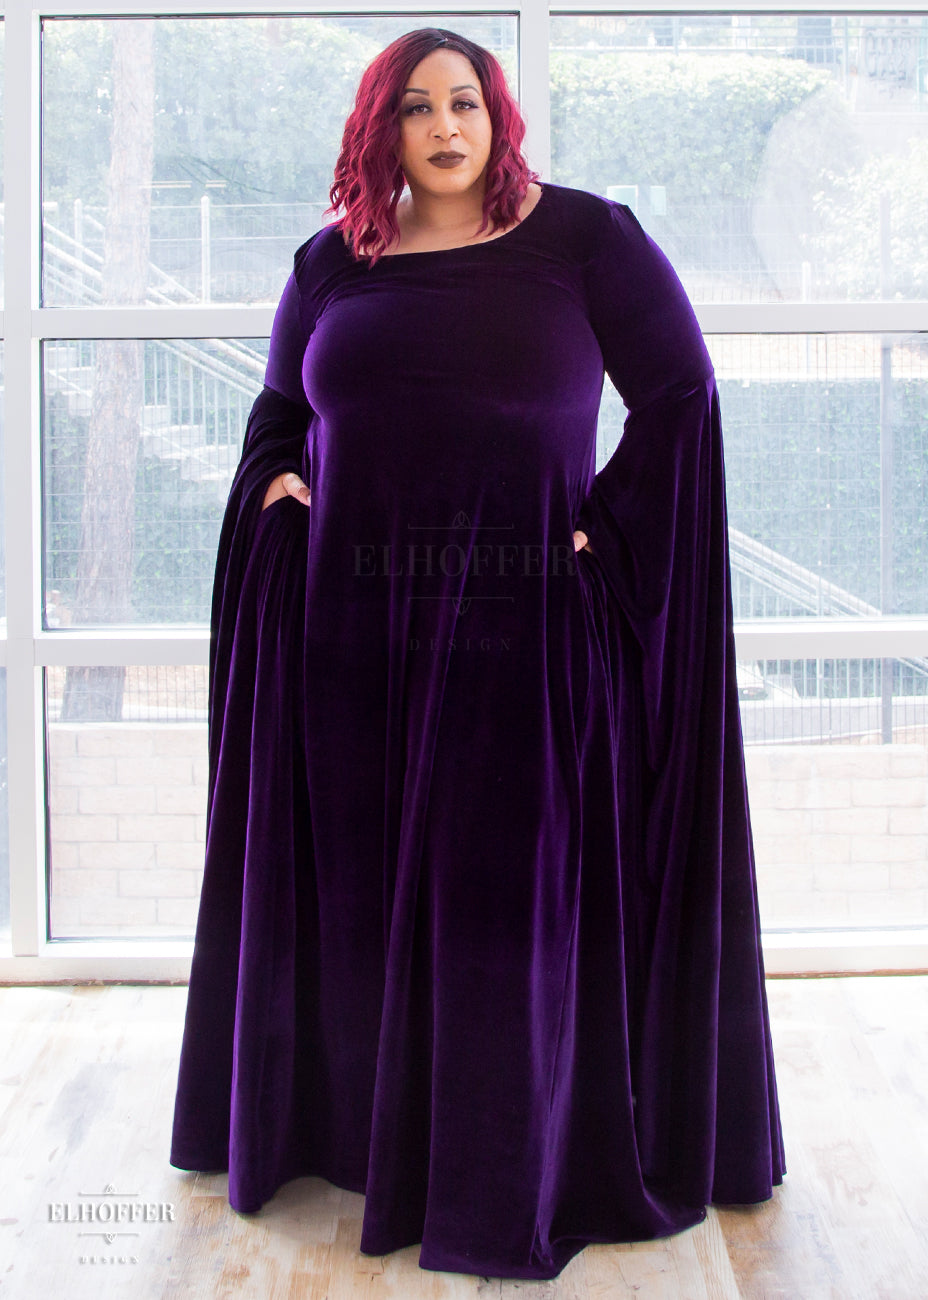 Dawn (a medium dark skinned size 3X model with burgundy hair) wears the purple velvet floor length dress with her hands in the pockets. It has a boatneck neckline and extra long flowing sleeves that fall to ankle length.